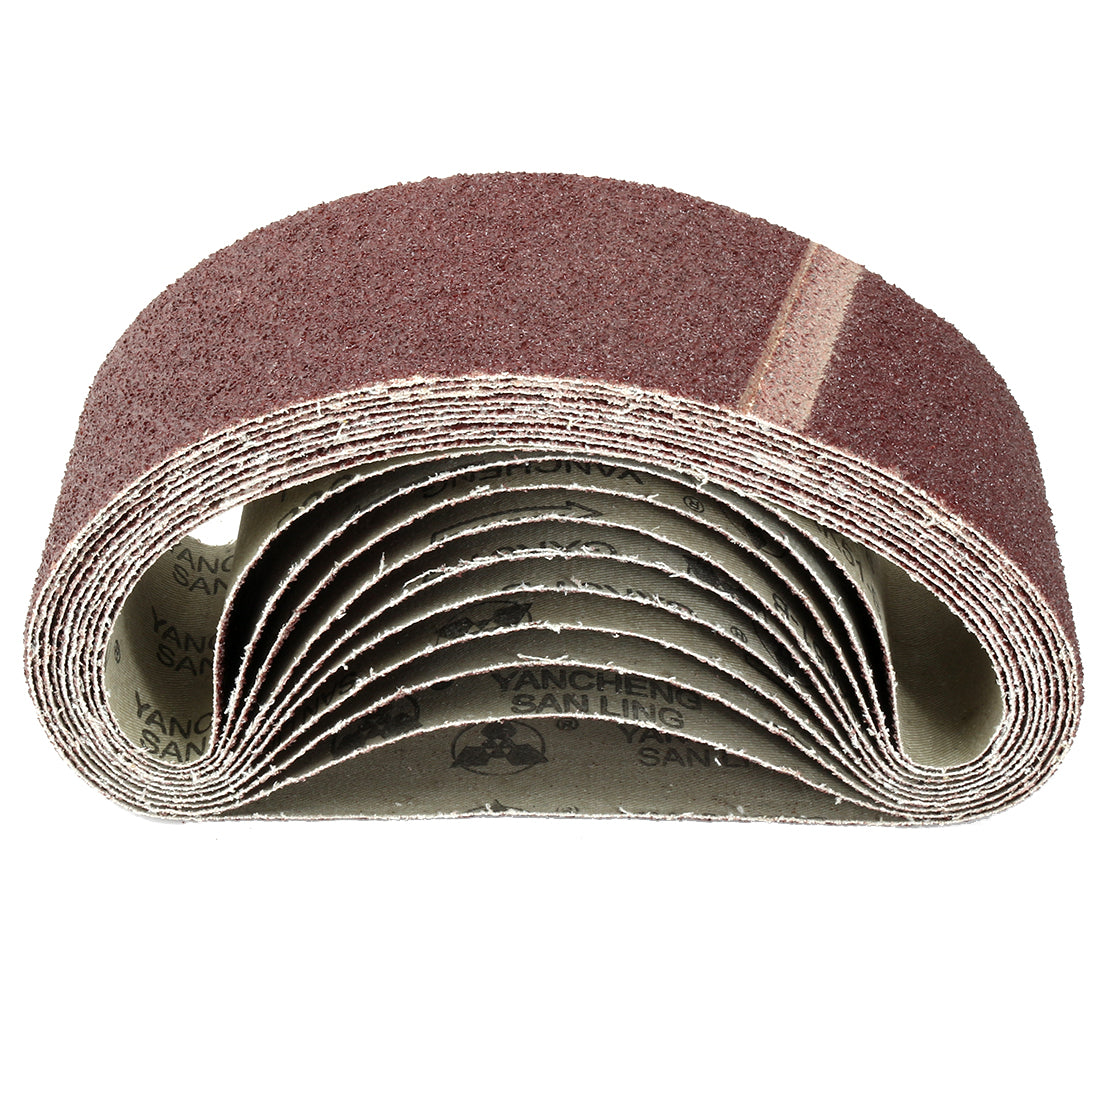 uxcell Uxcell 3-Inch x 21-Inch Aluminum Oxide Sanding Belt 36 Grits Lapped Joint 10pcs